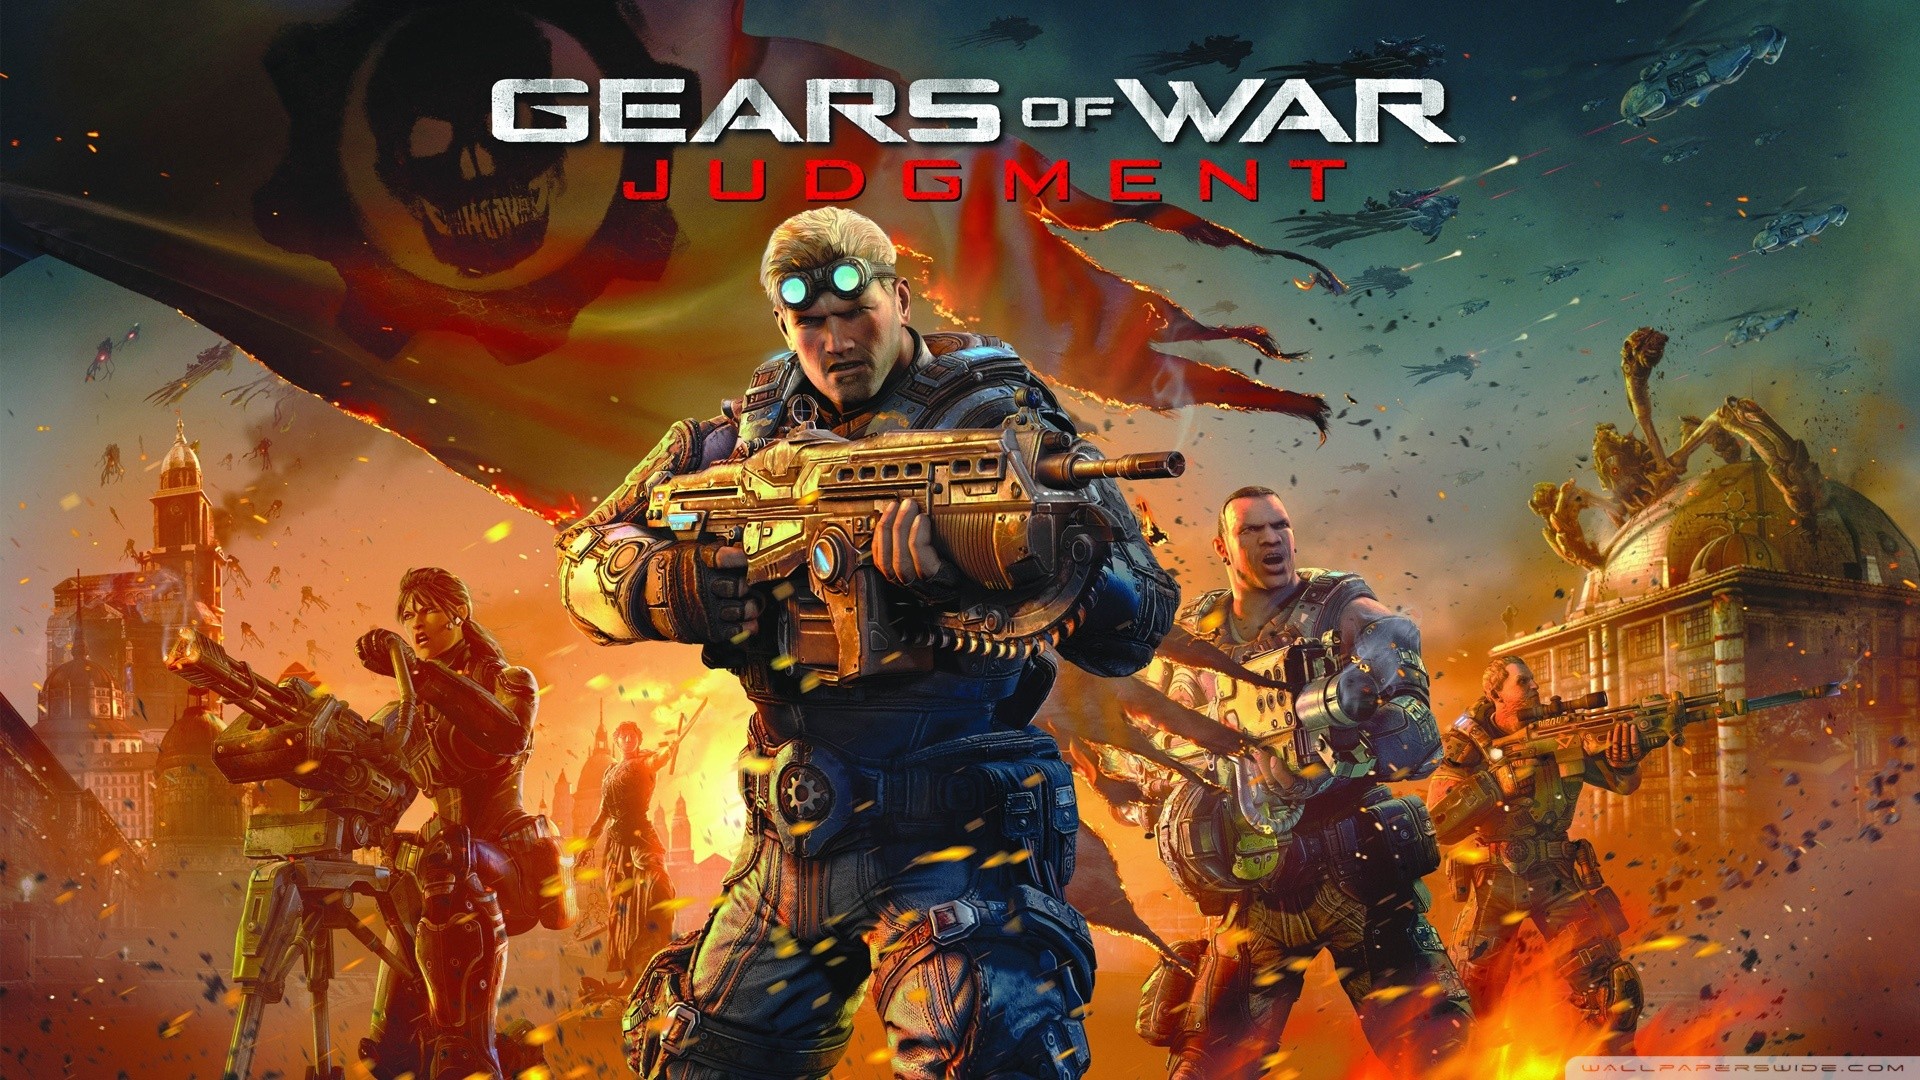 General 1920x1080 Gears of War video games Gears of War: Judgment video game characters